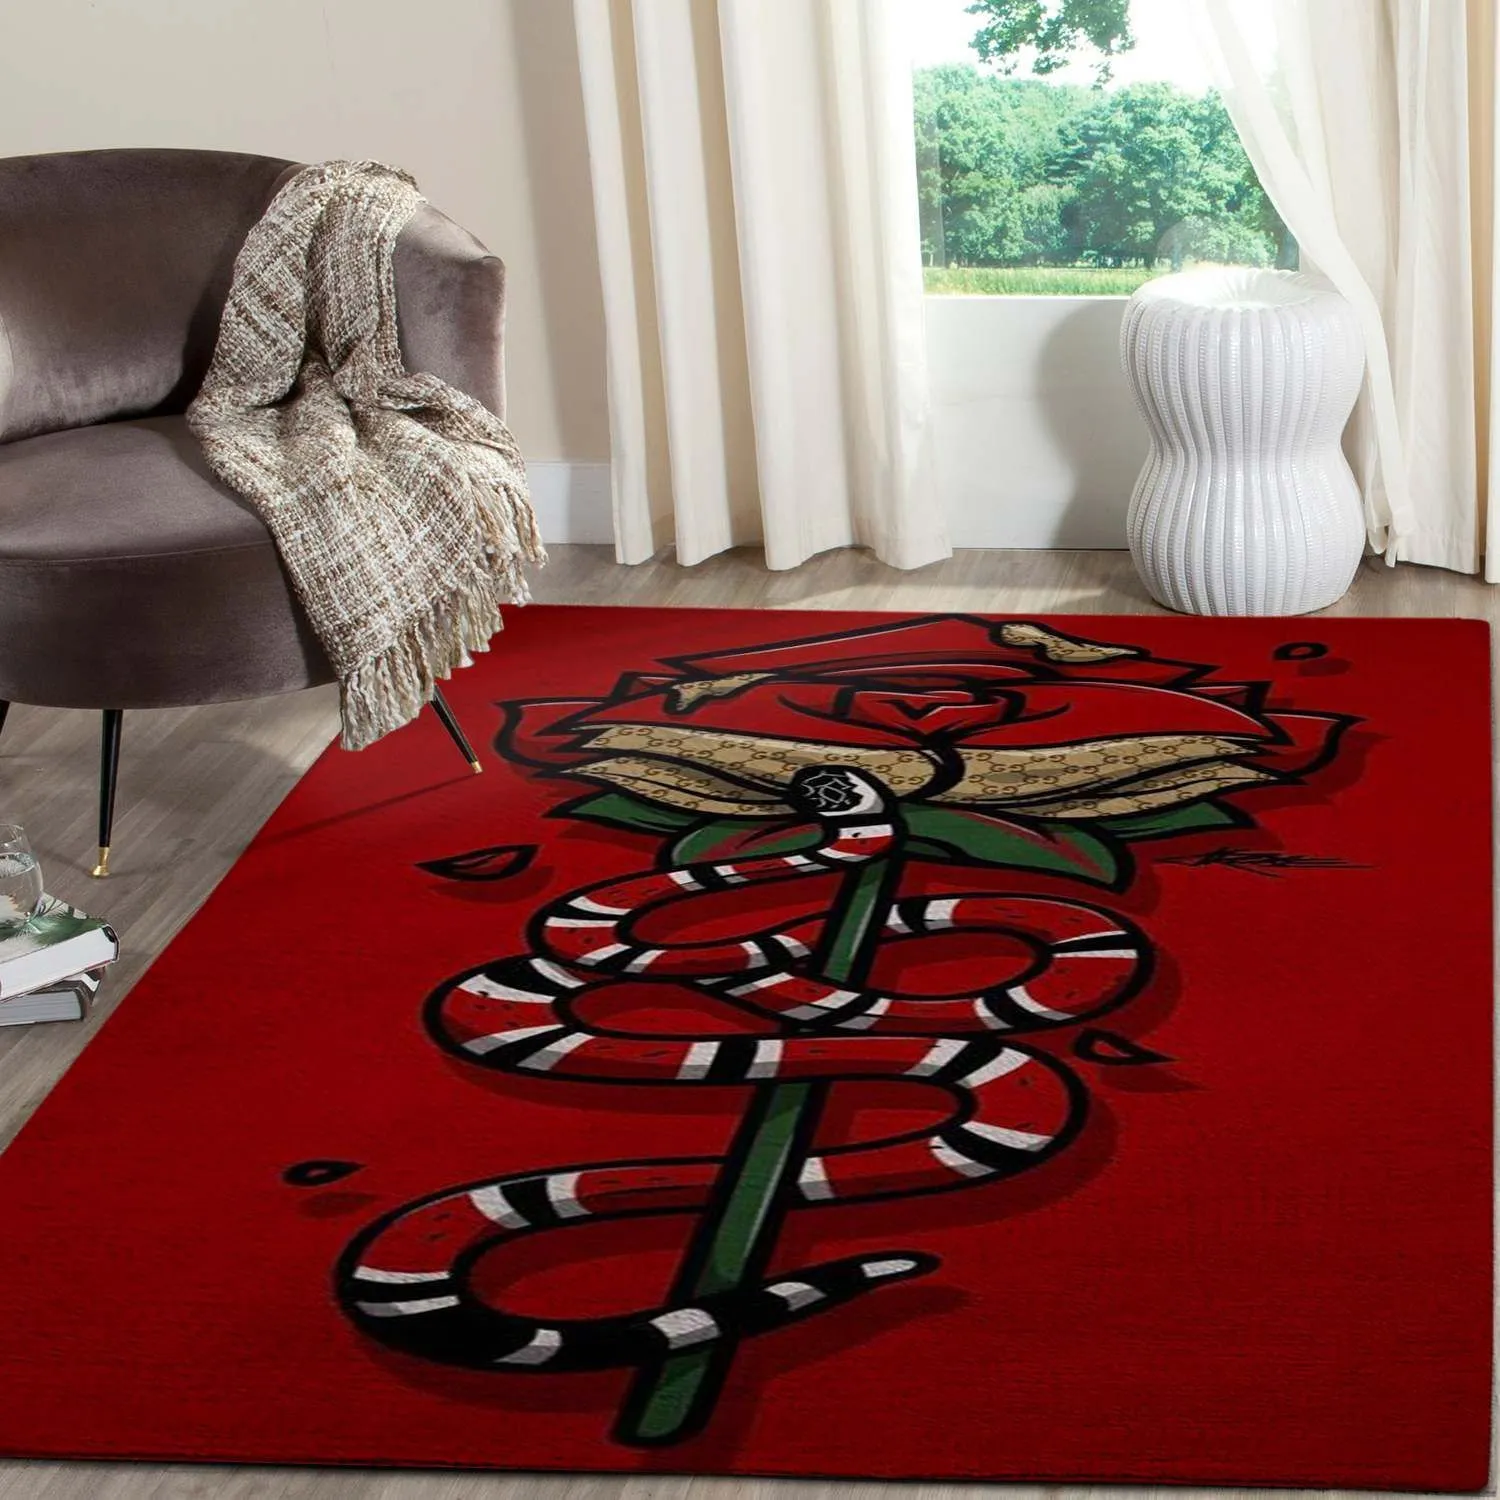 Gucci Red Snake Rectangle Rug Luxury Door Mat Area Carpet Home Decor Fashion Brand